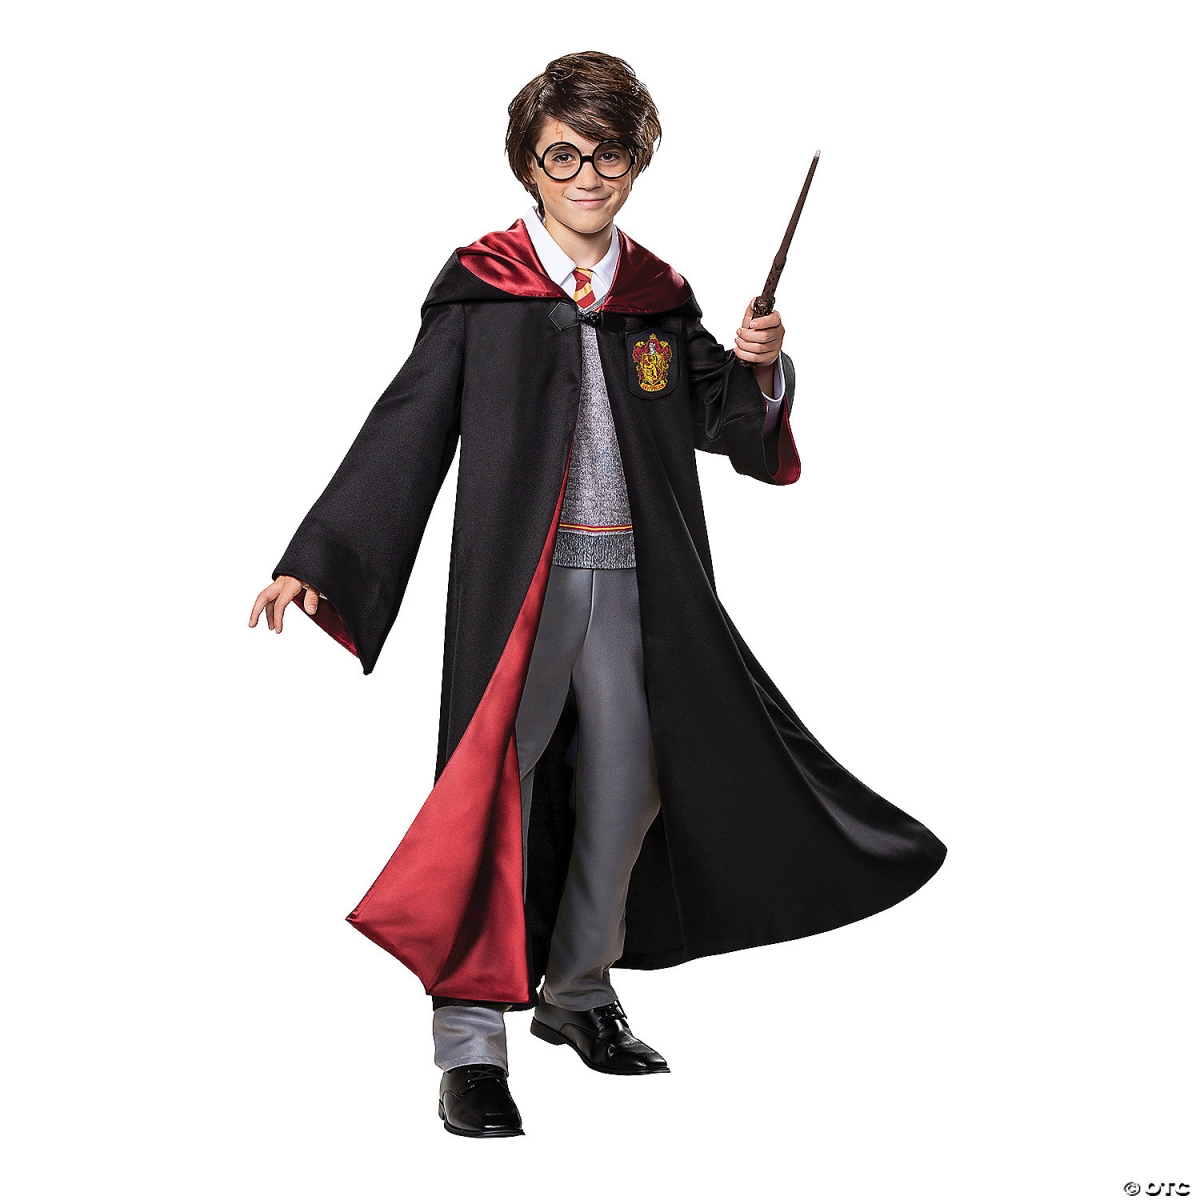 Picture of Disguise DG107539L Kids Prestige Harry Potter Costume - Small 4-6